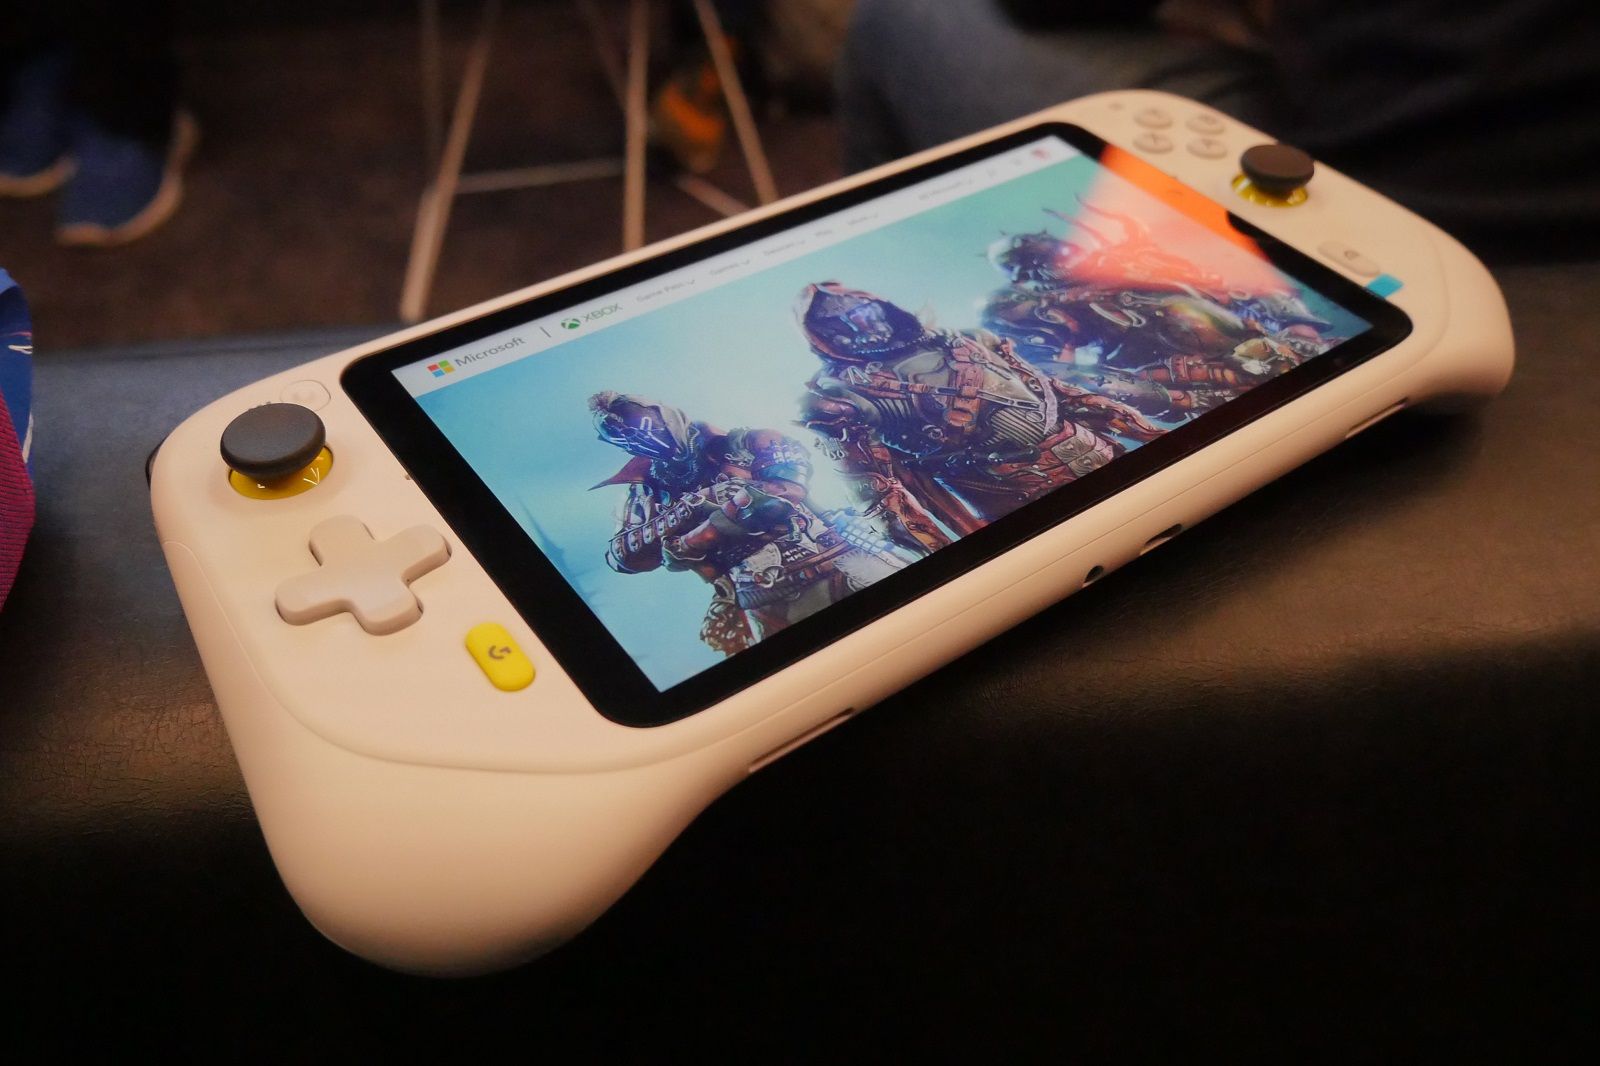 Logitech G Cloud gaming handheld unveiled with 7 1080p display